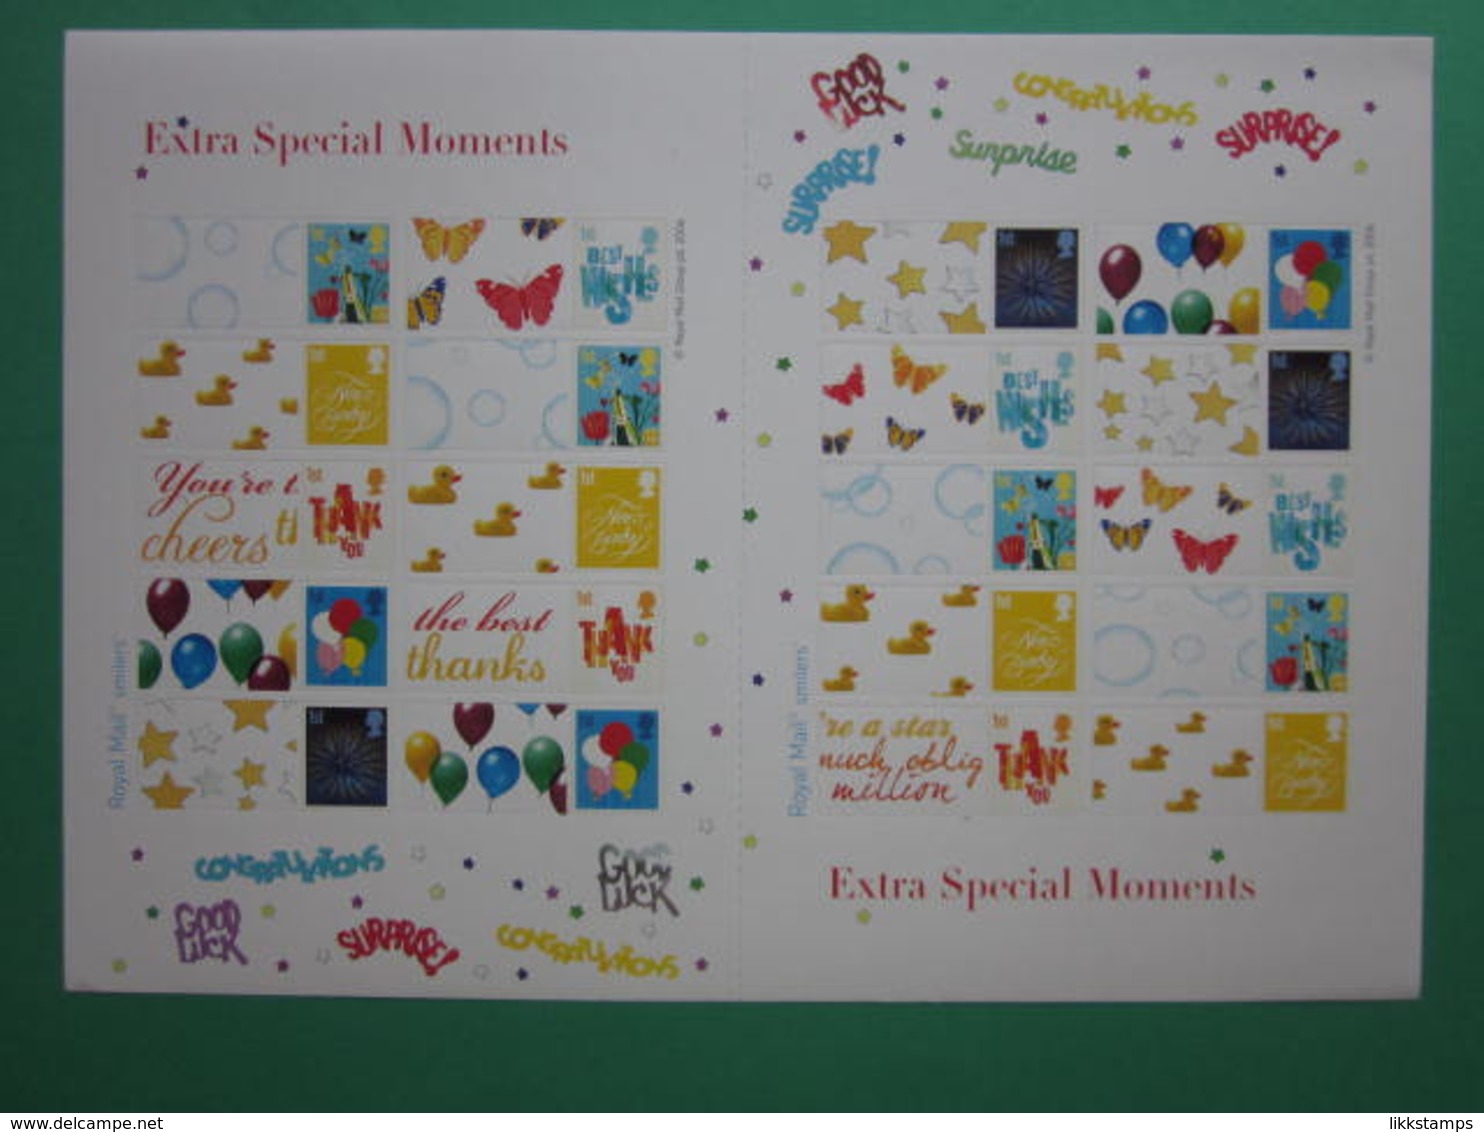 2006 ROYAL MAIL EXTRA SPECIAL MOMENTS GENERIC SMILERS SHEET. #SS0037 - Smilers Sheets